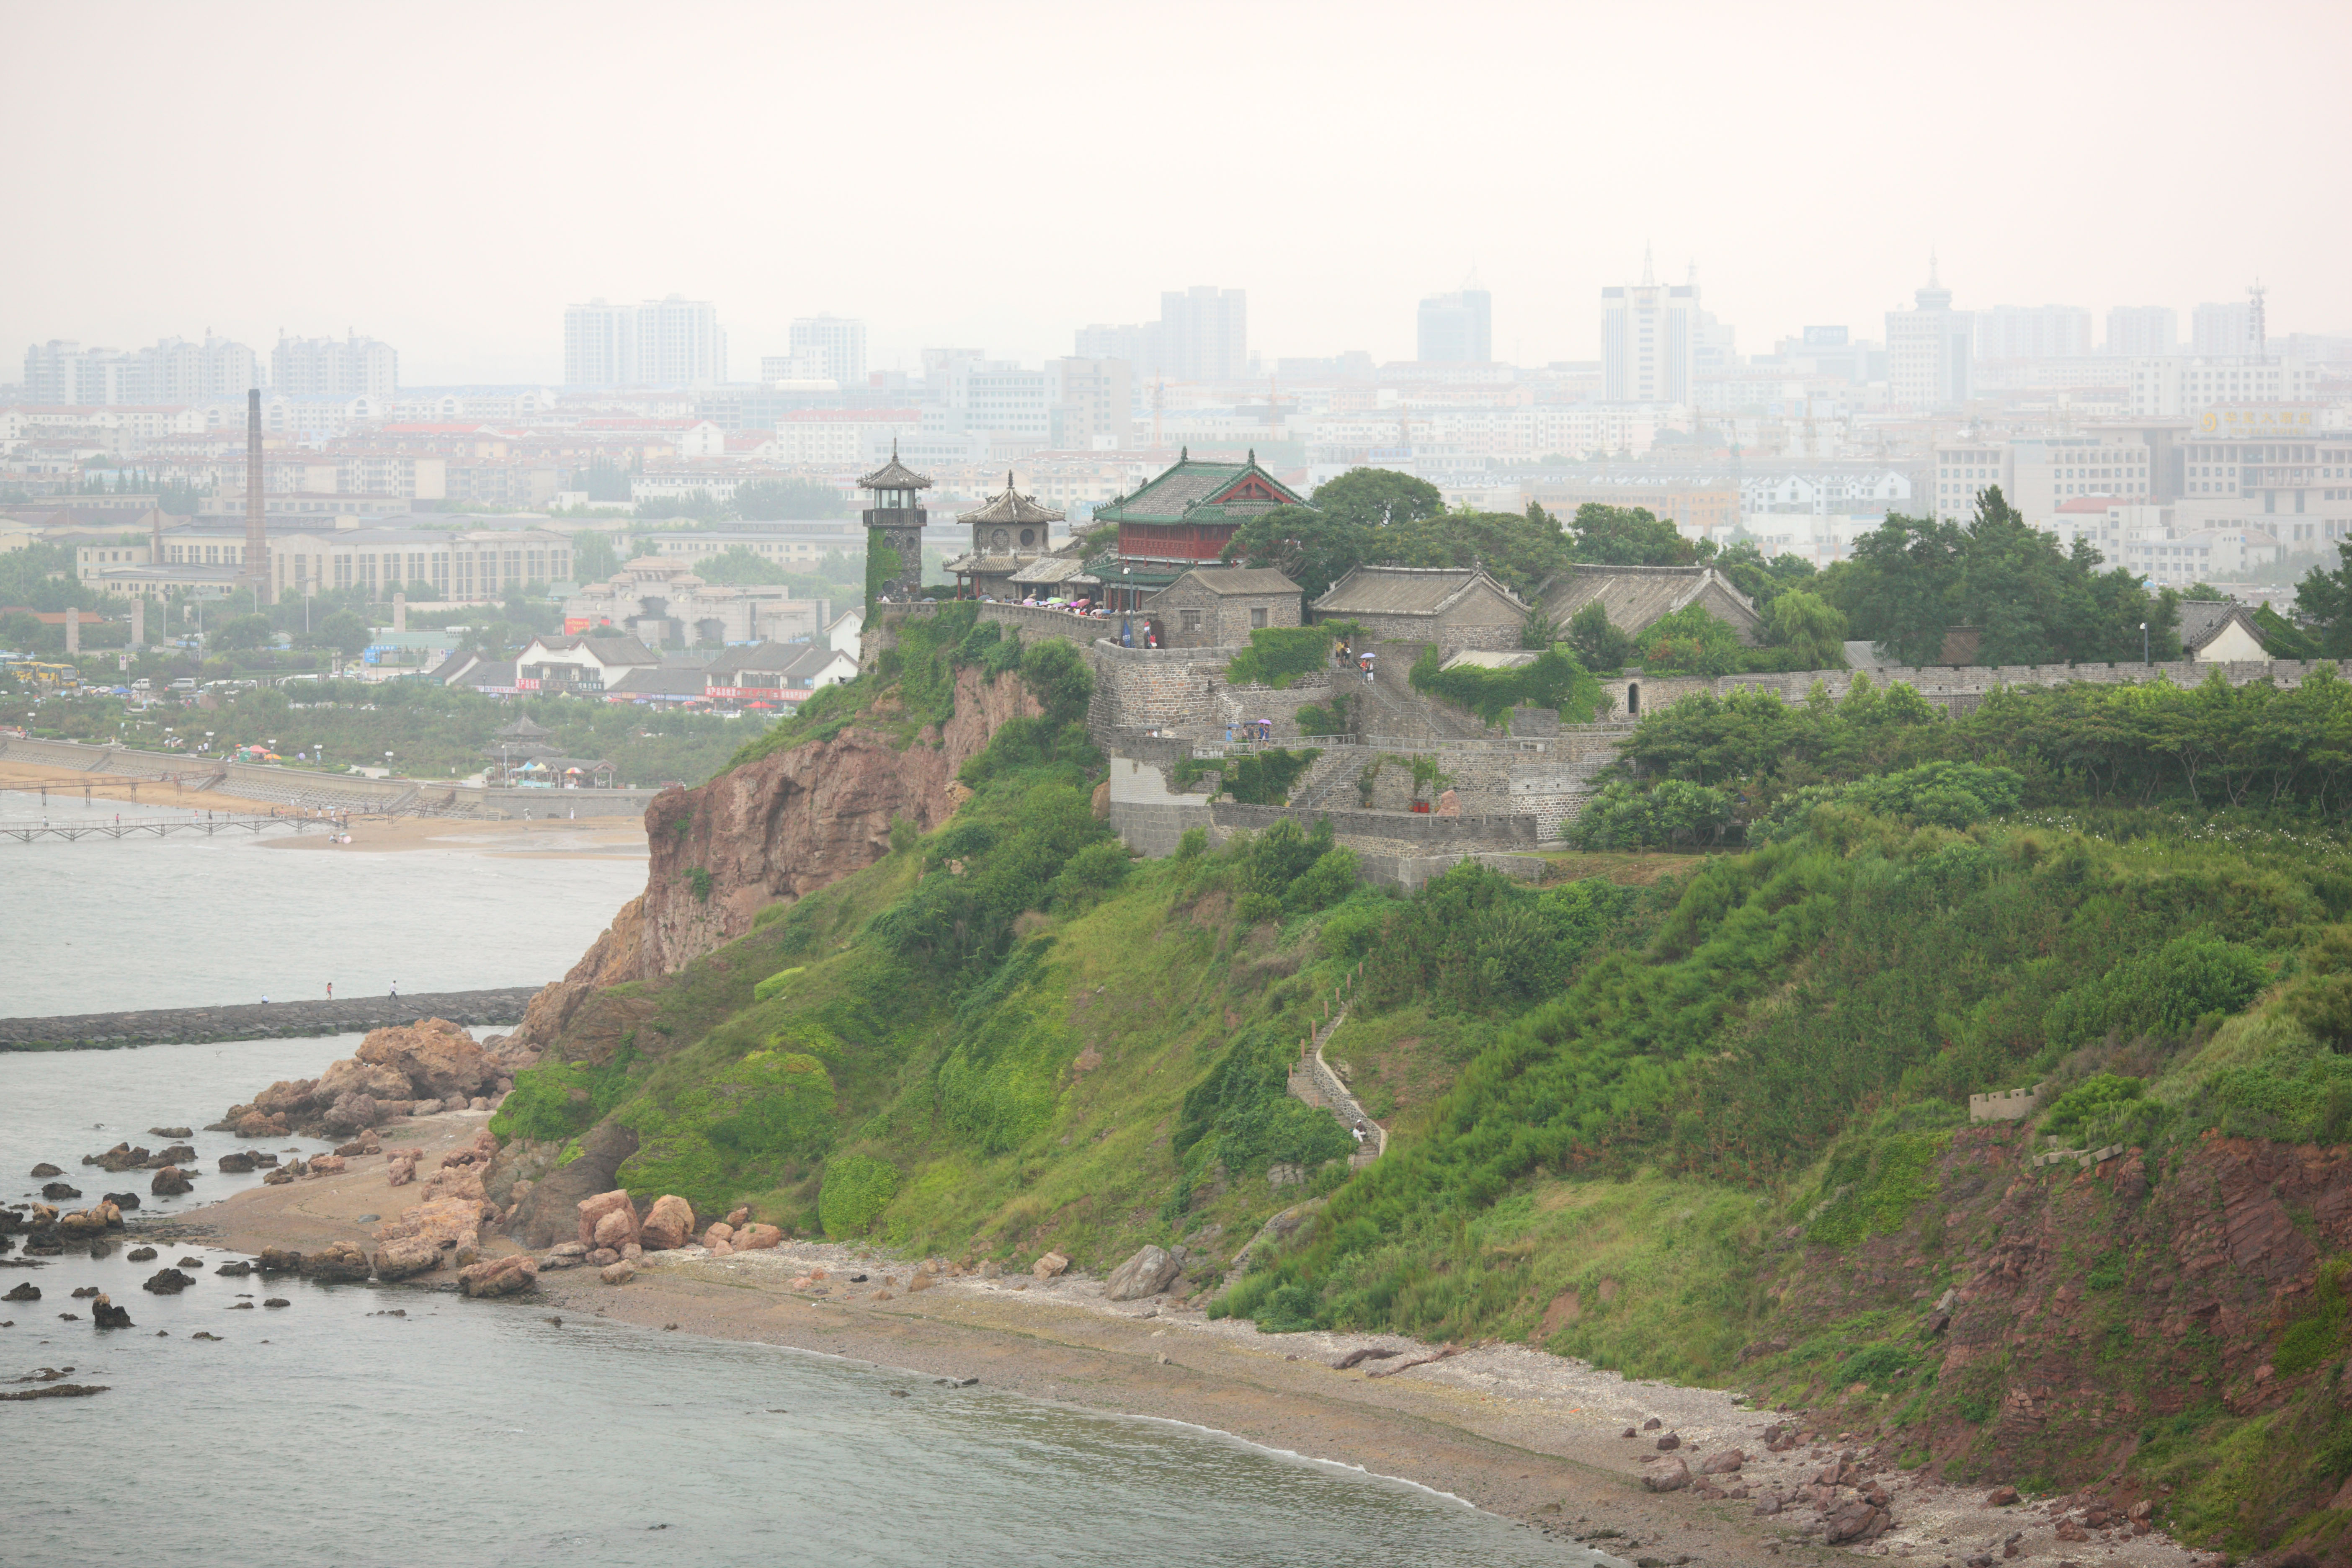 photo,material,free,landscape,picture,stock photo,Creative Commons,Penglai Pavilion, mirage, lofty building, Chinese food, sightseeing spot